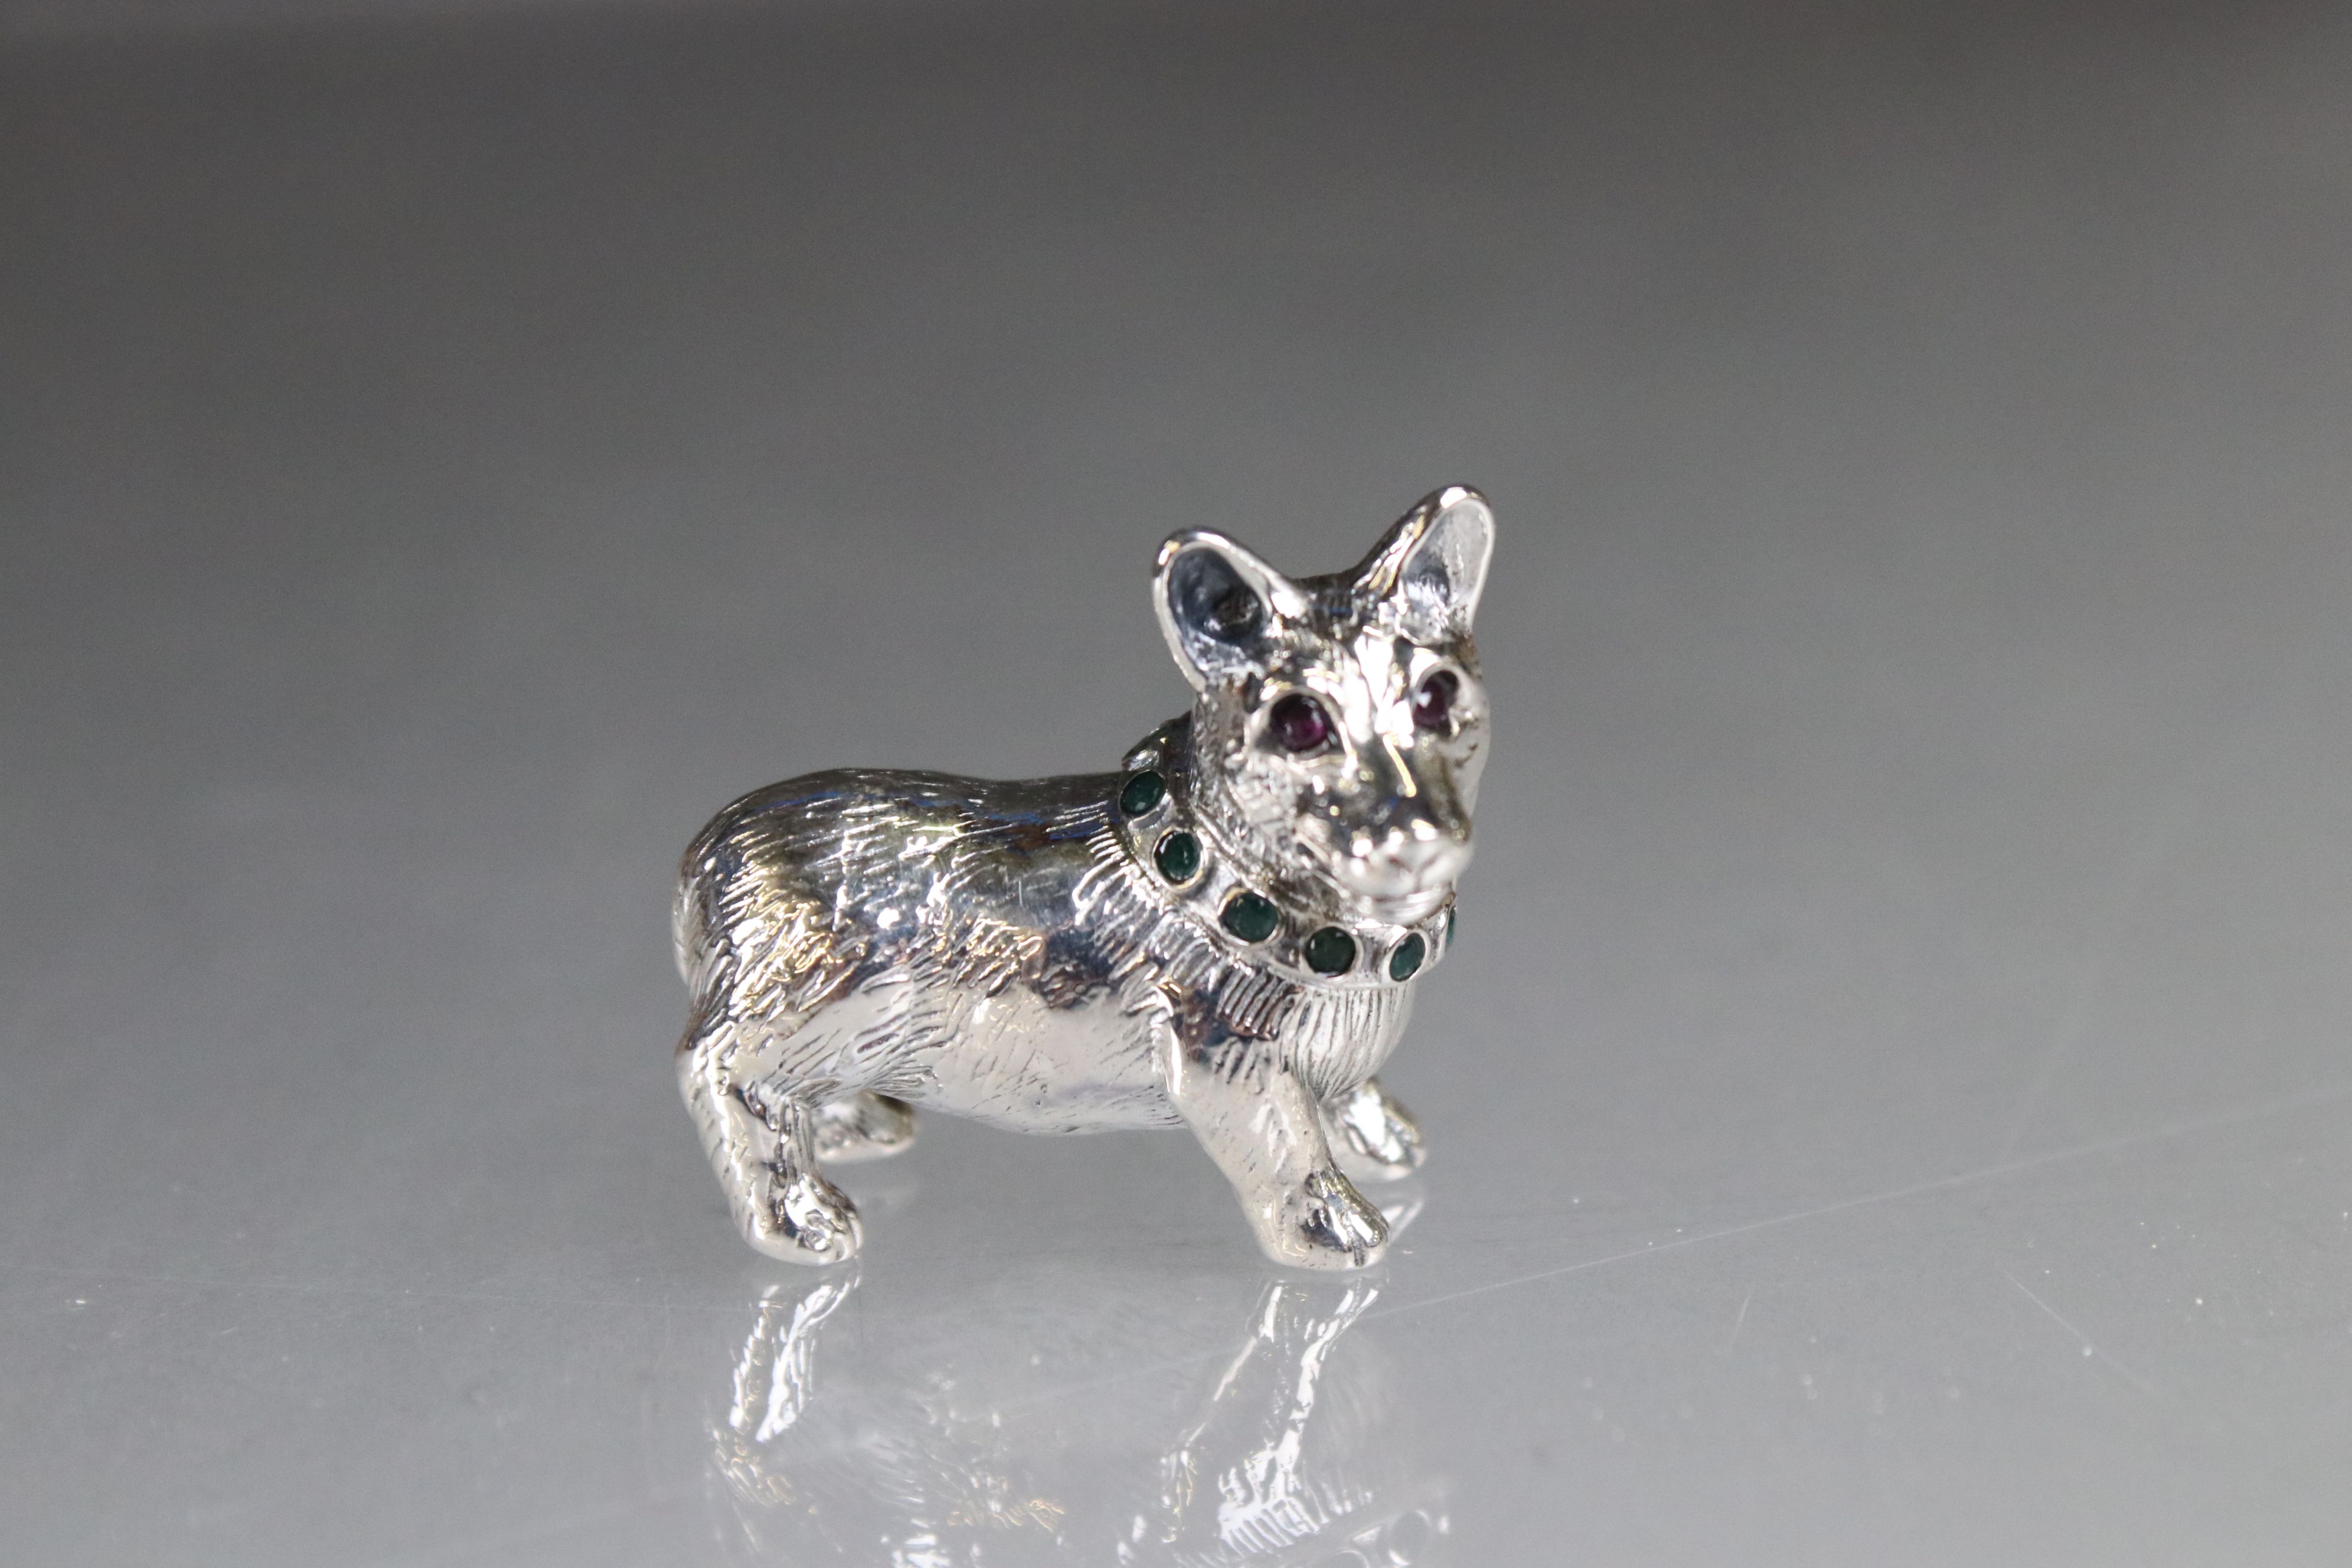 Silver figure of a dog with emerald collar